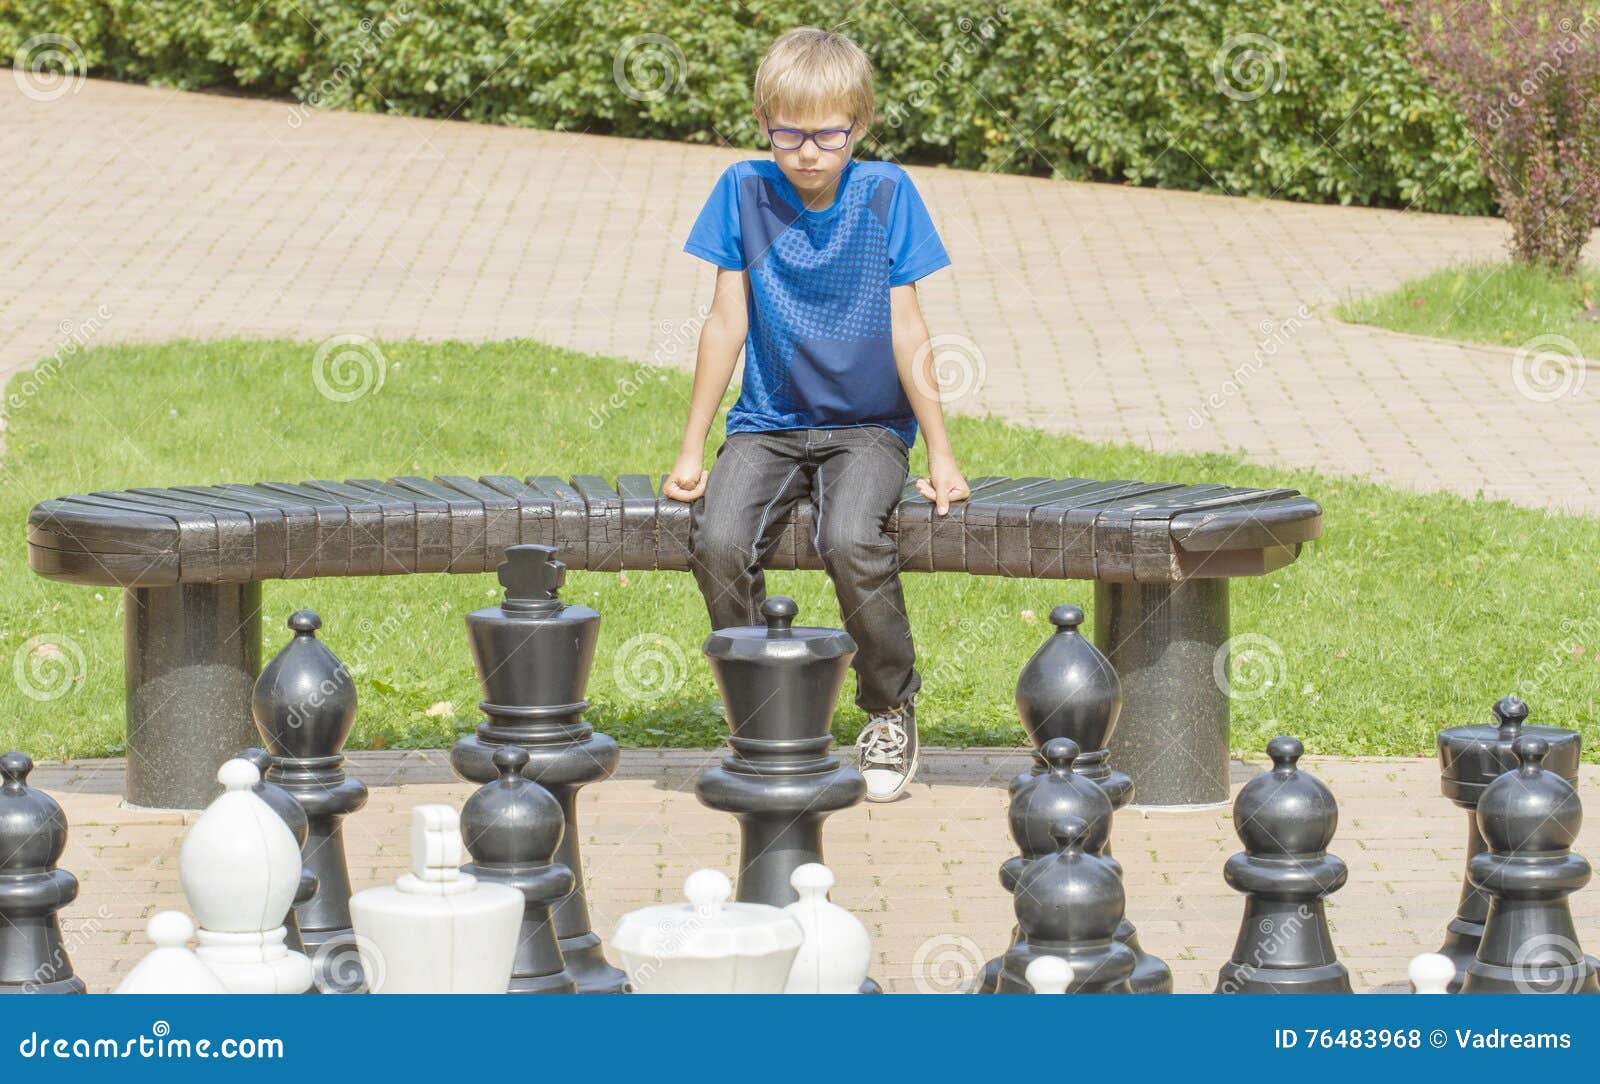 Children's Restraining Hand Thoughtfully Figure Before The Next Chess Move  Stock Photo, Picture and Royalty Free Image. Image 77247675.